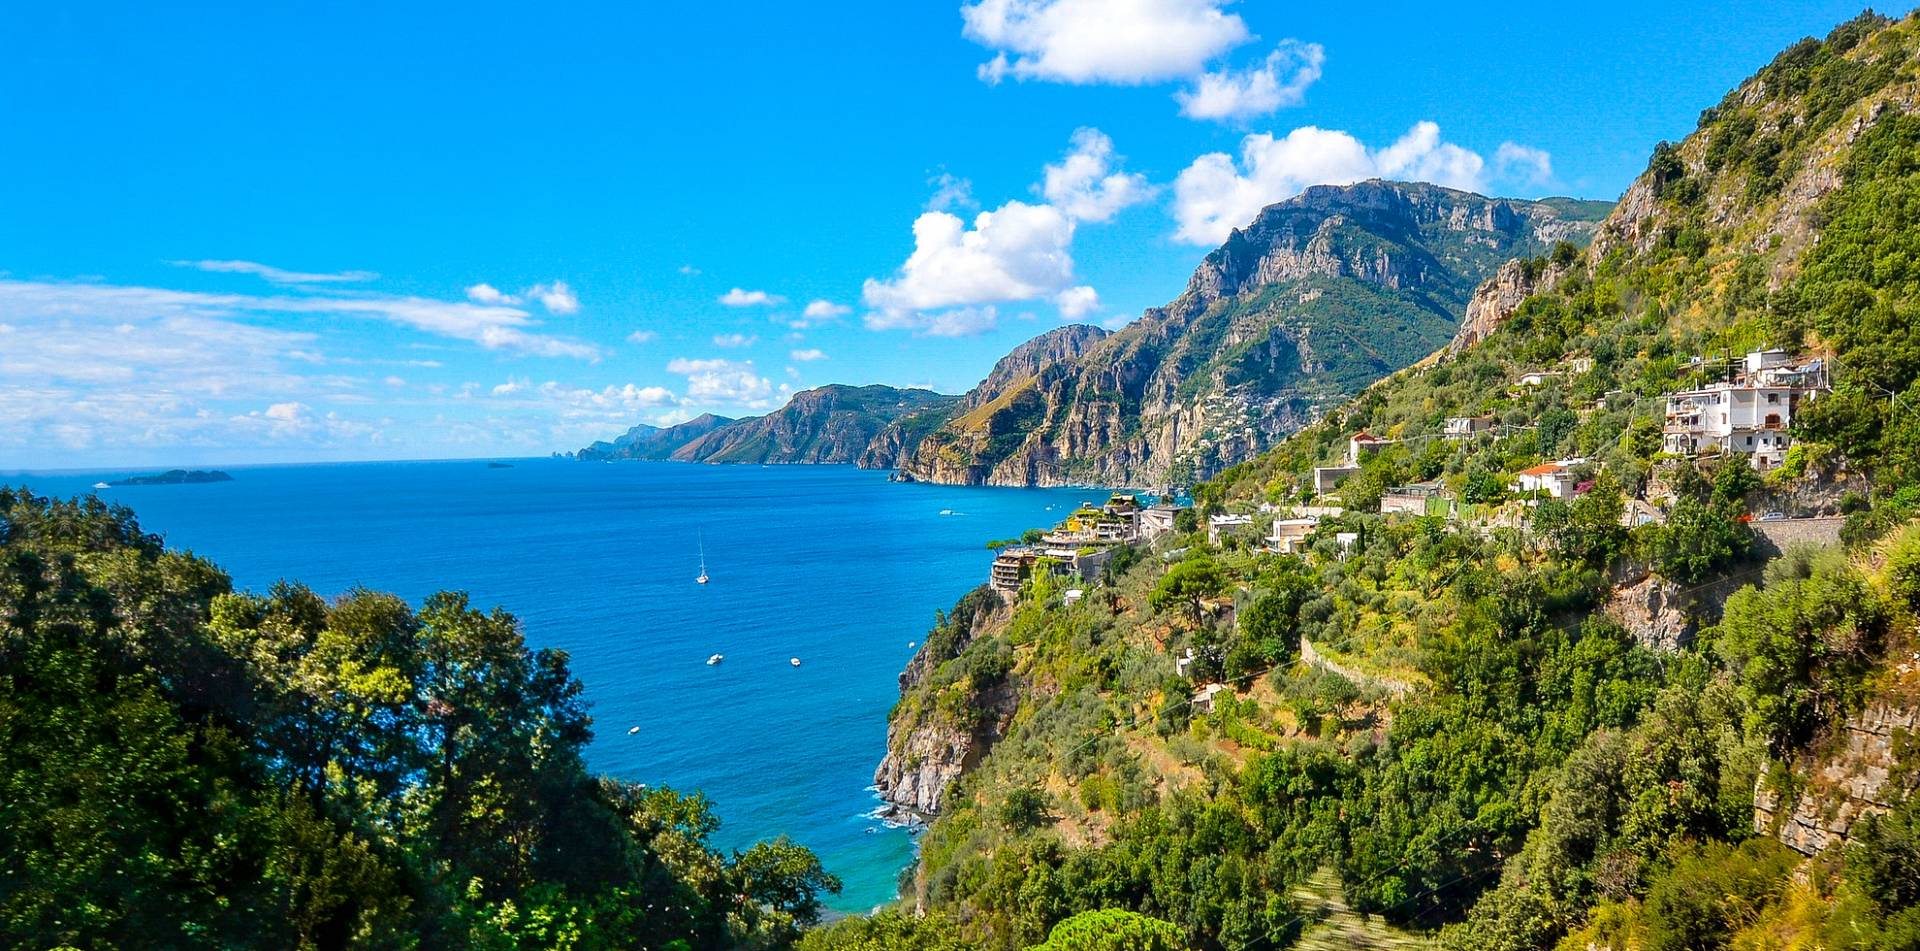 The Green and the Blue of the Amalfi Coast